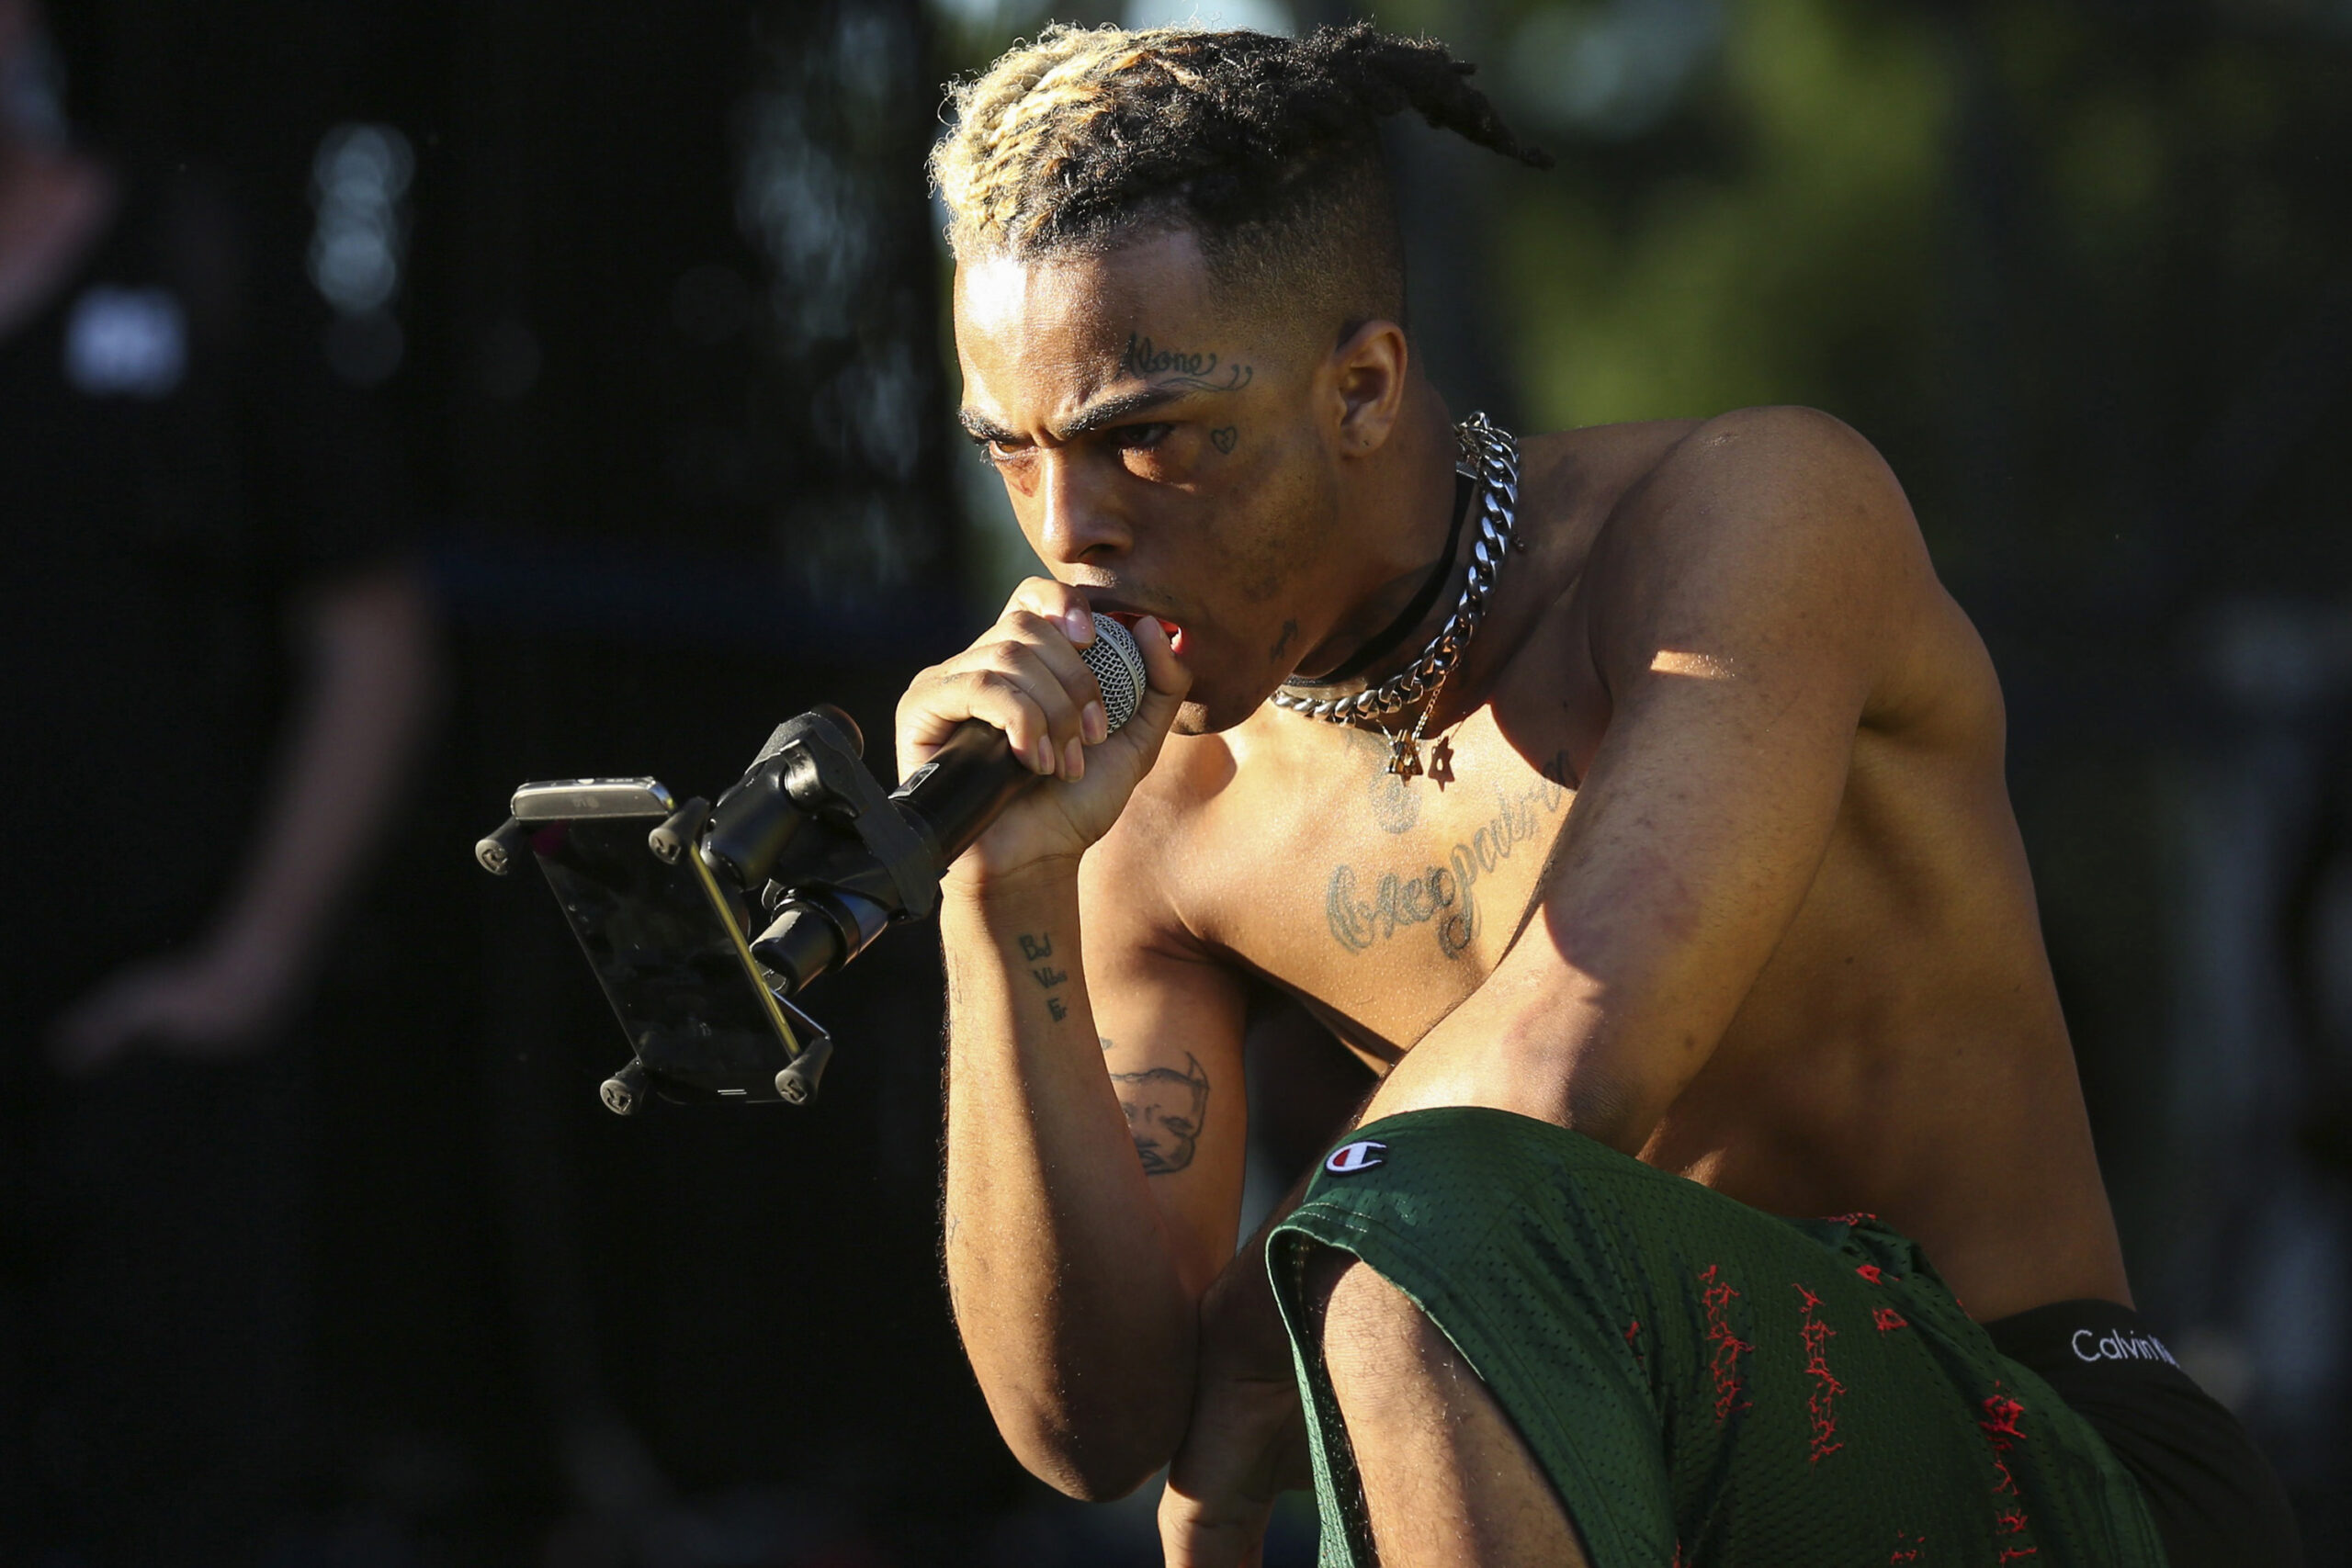 Jury Convicts Three Men Of First-Degree Murder, Armed Robbery In Killing Of Rapper XXXTentacion